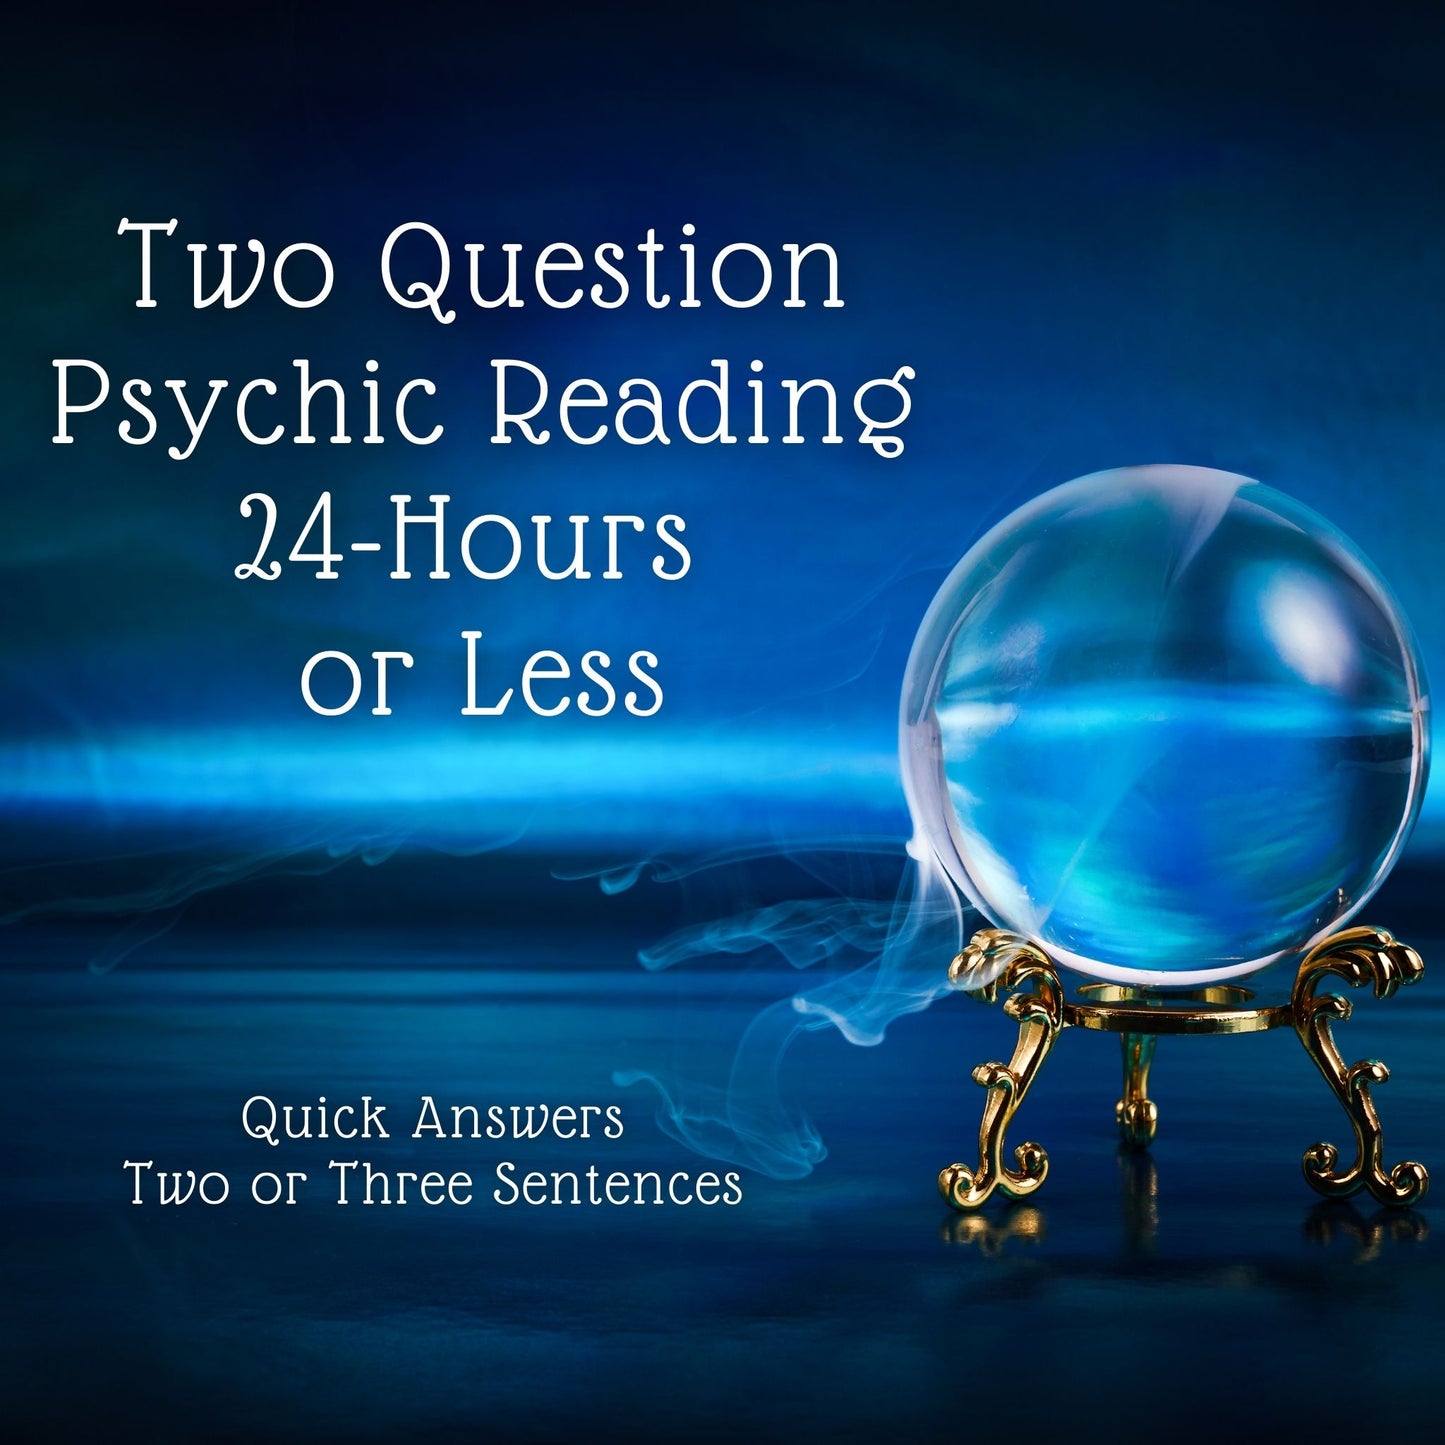 Two Question Psychic Reading 24-Hours or Less